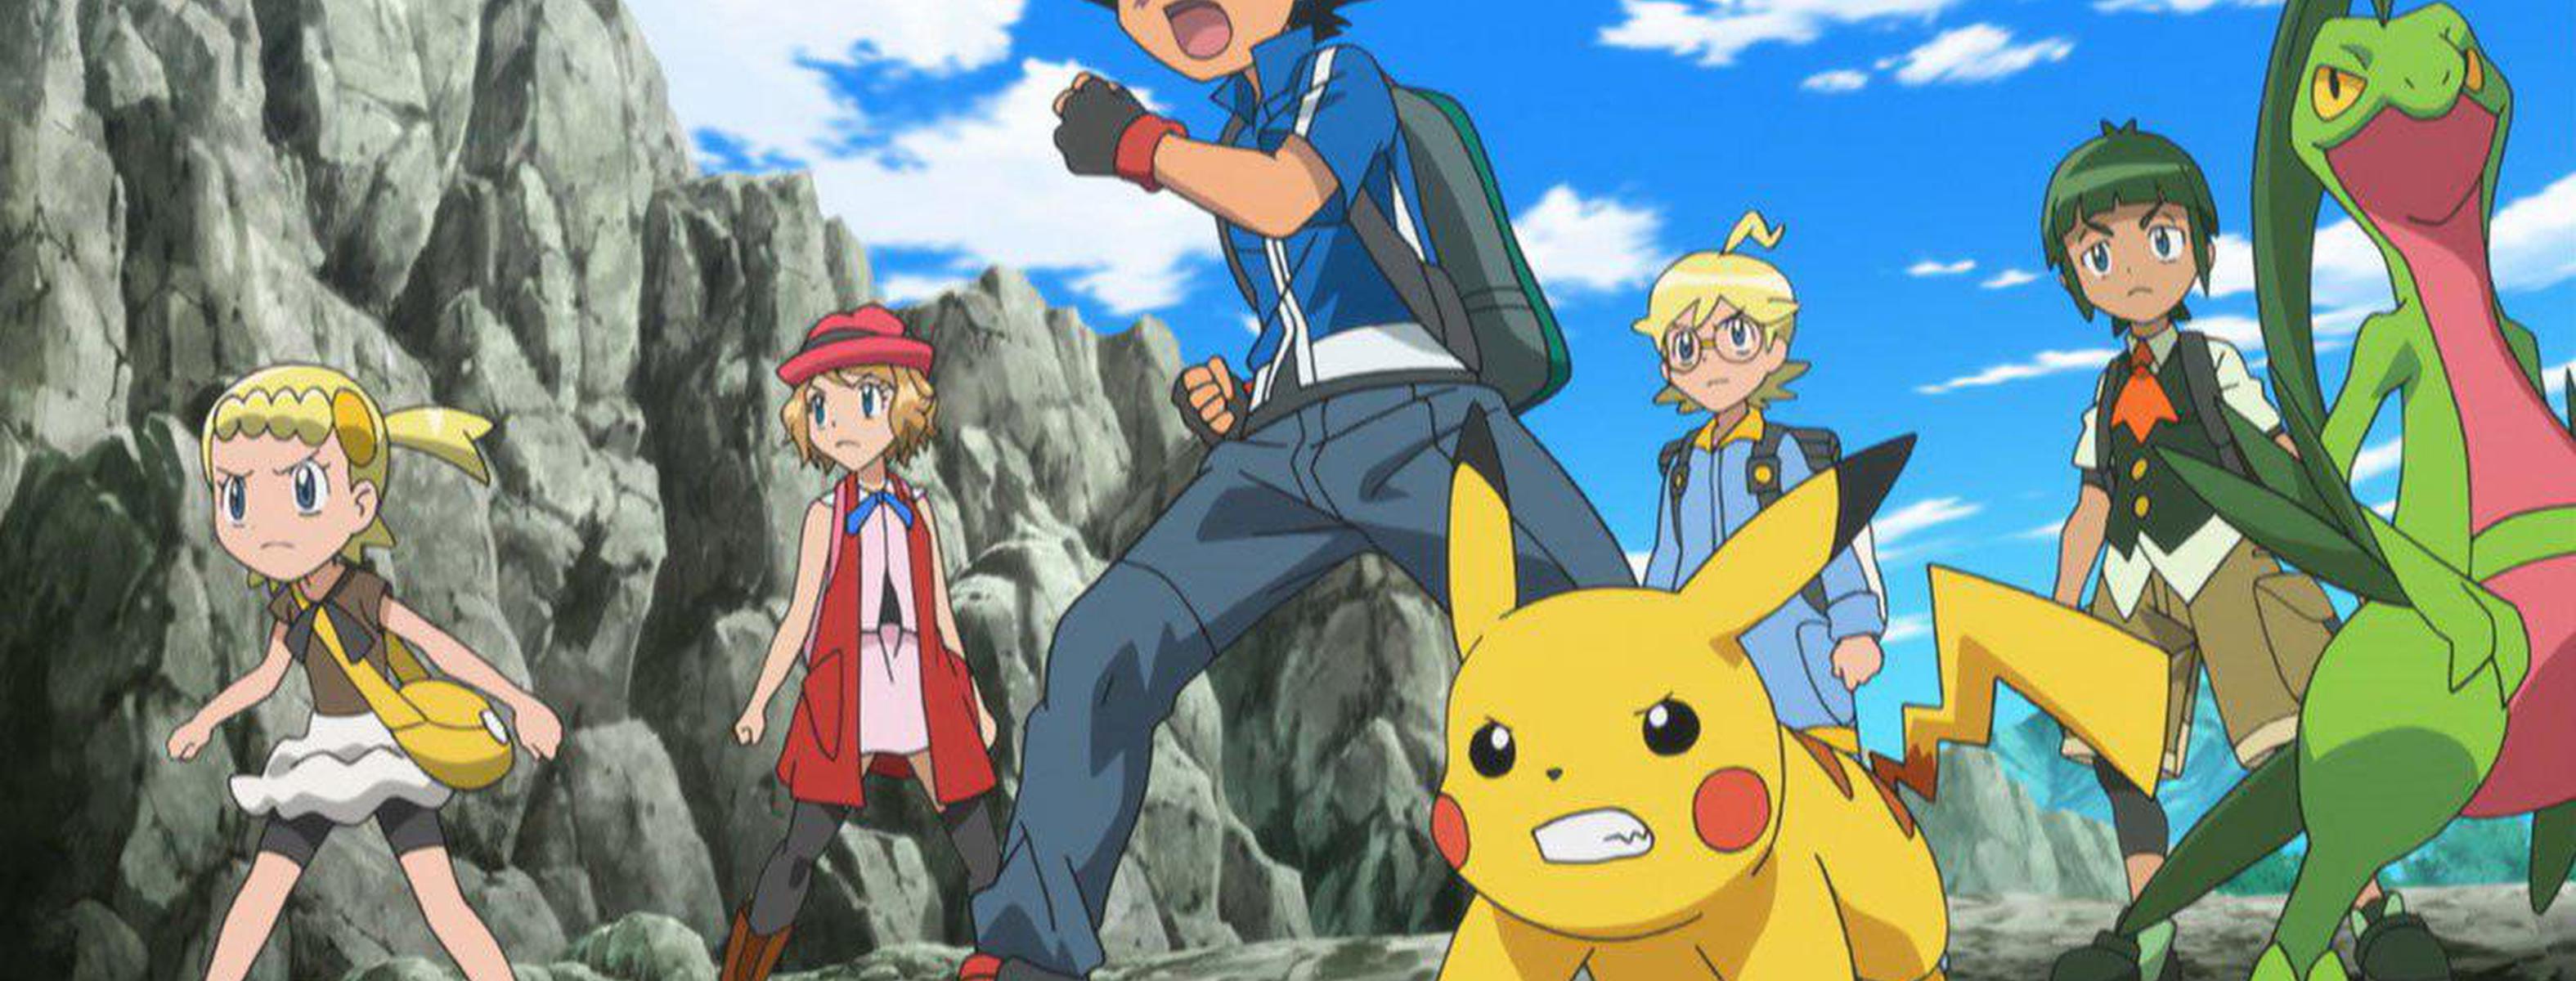 A Live-Action Pokémon Series Is in Development At Netflix